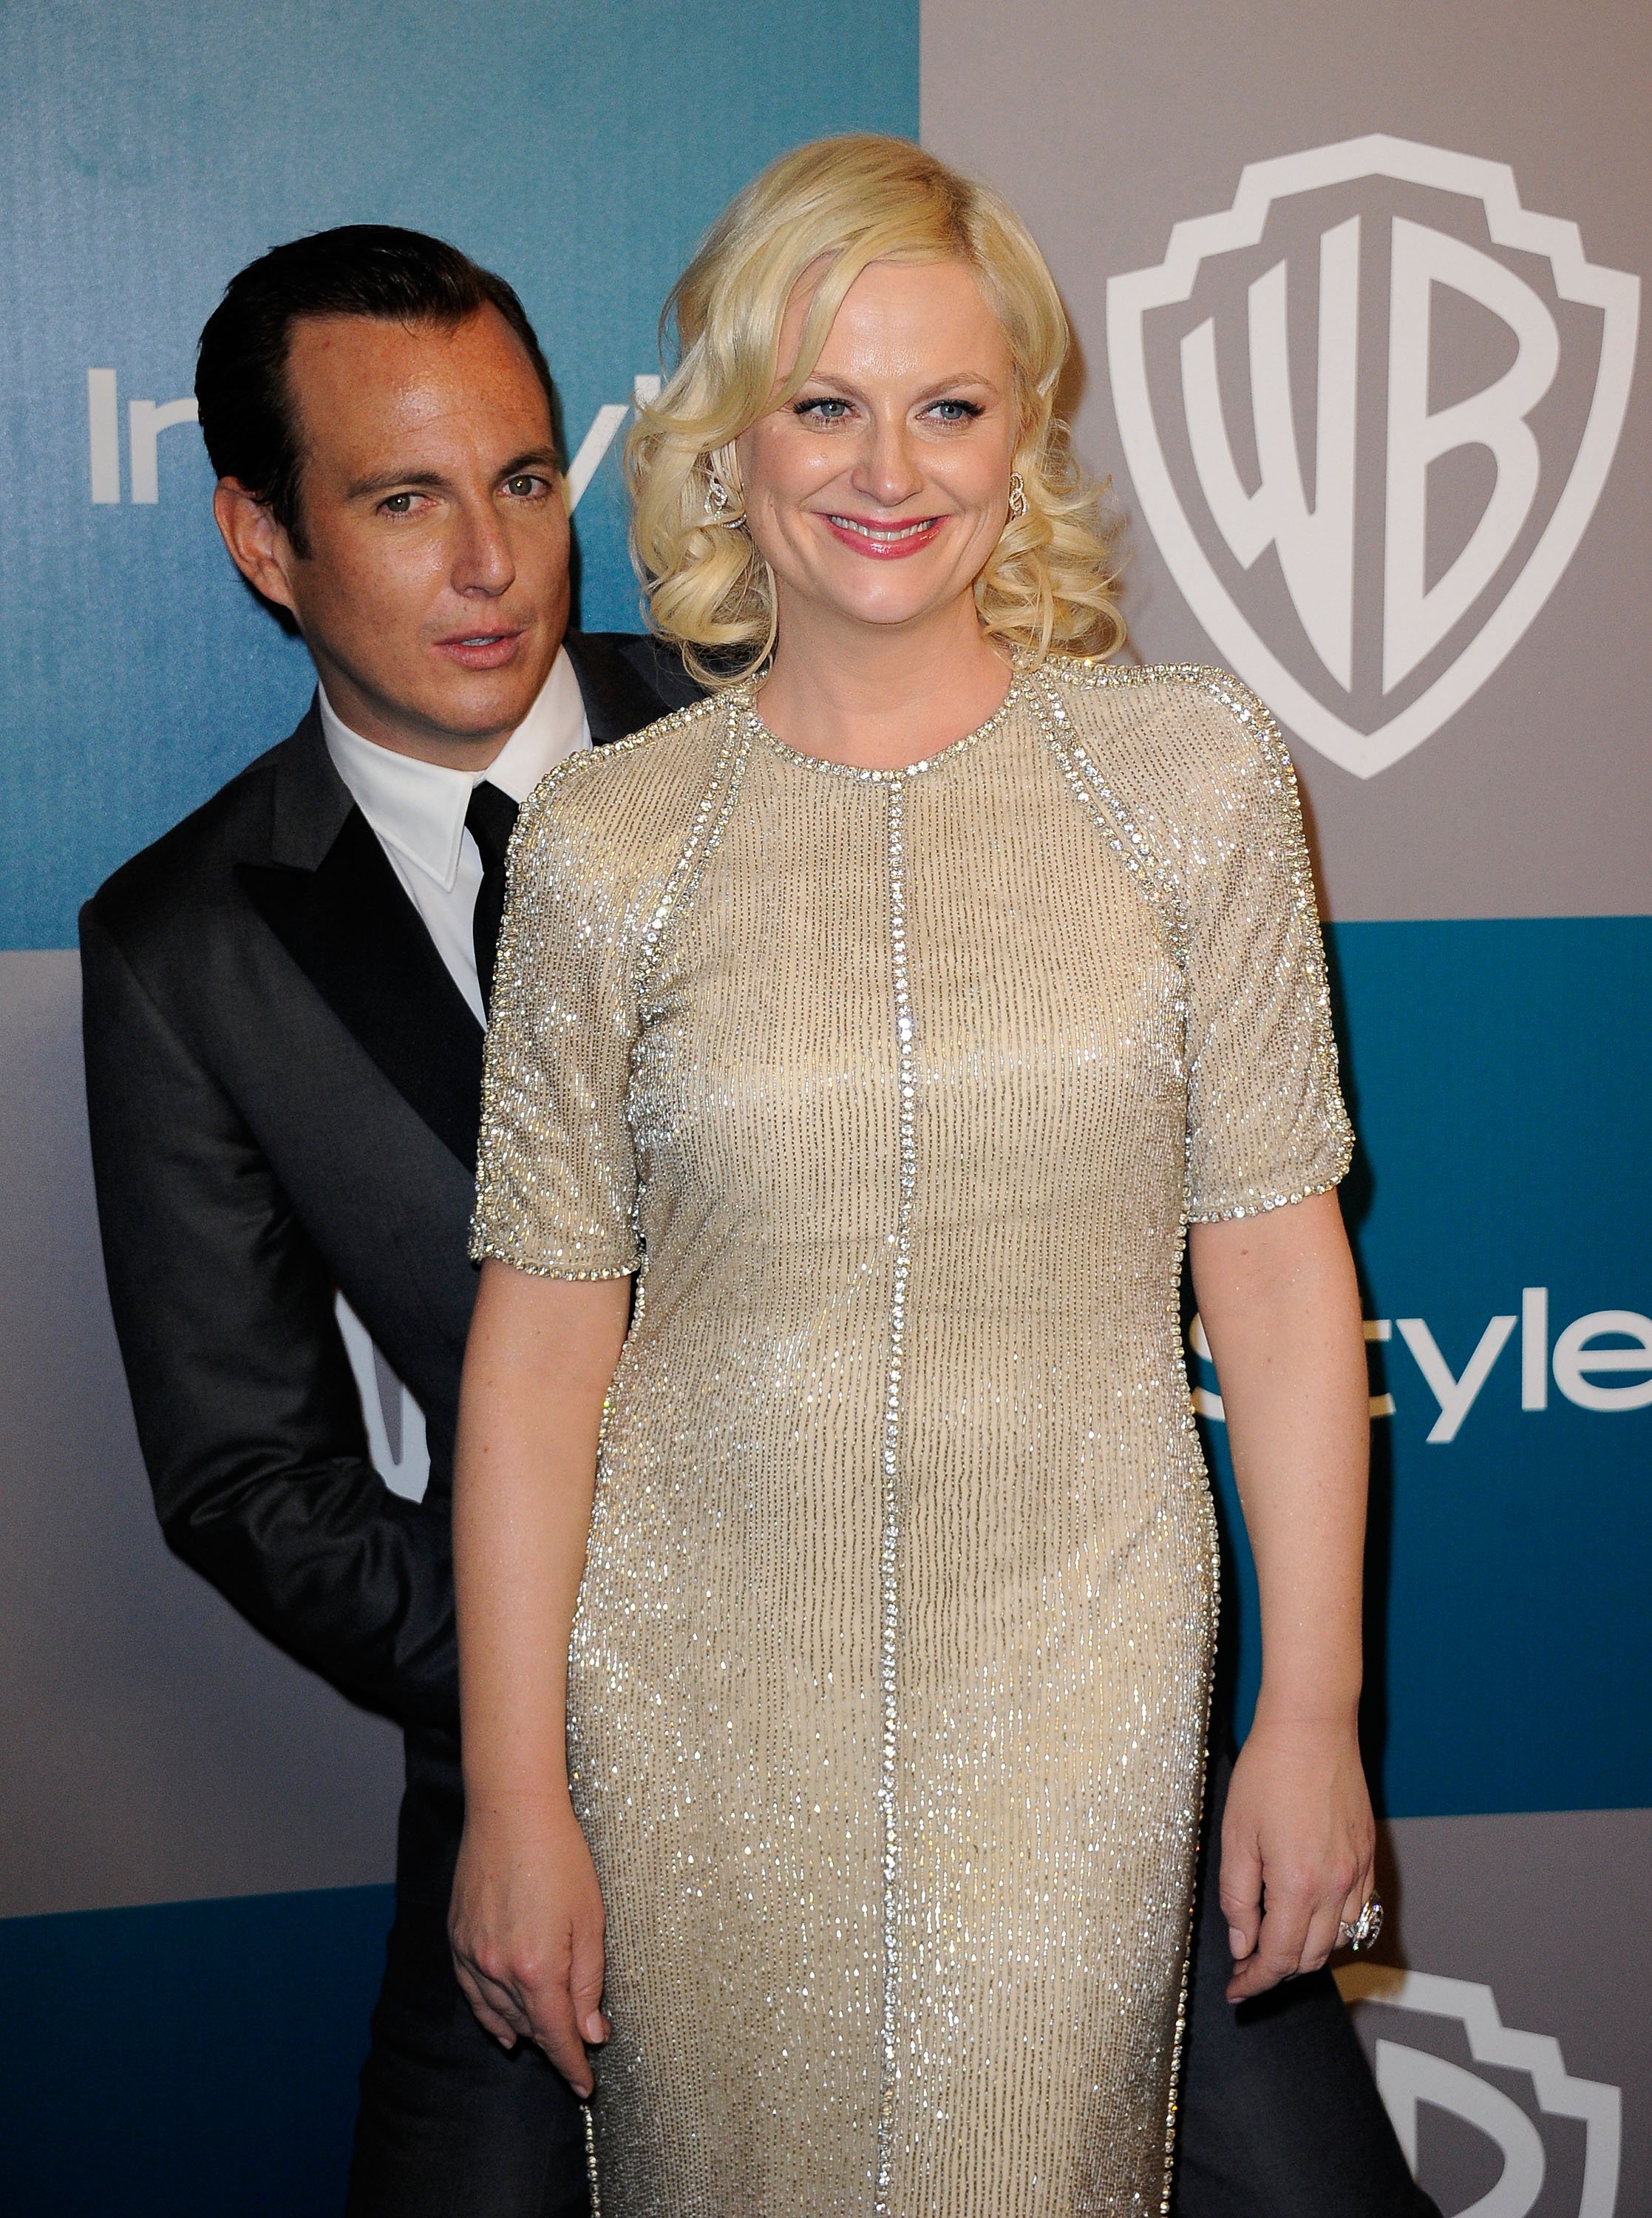 Amy Poehler and Will Arnett arrive at 13th Annual Warner Bros. and InStyle Golden Globe Awards After Party at The Beverly Hilton hotel on January 15, 2012, in Beverly Hills, California. | Source: Getty Images